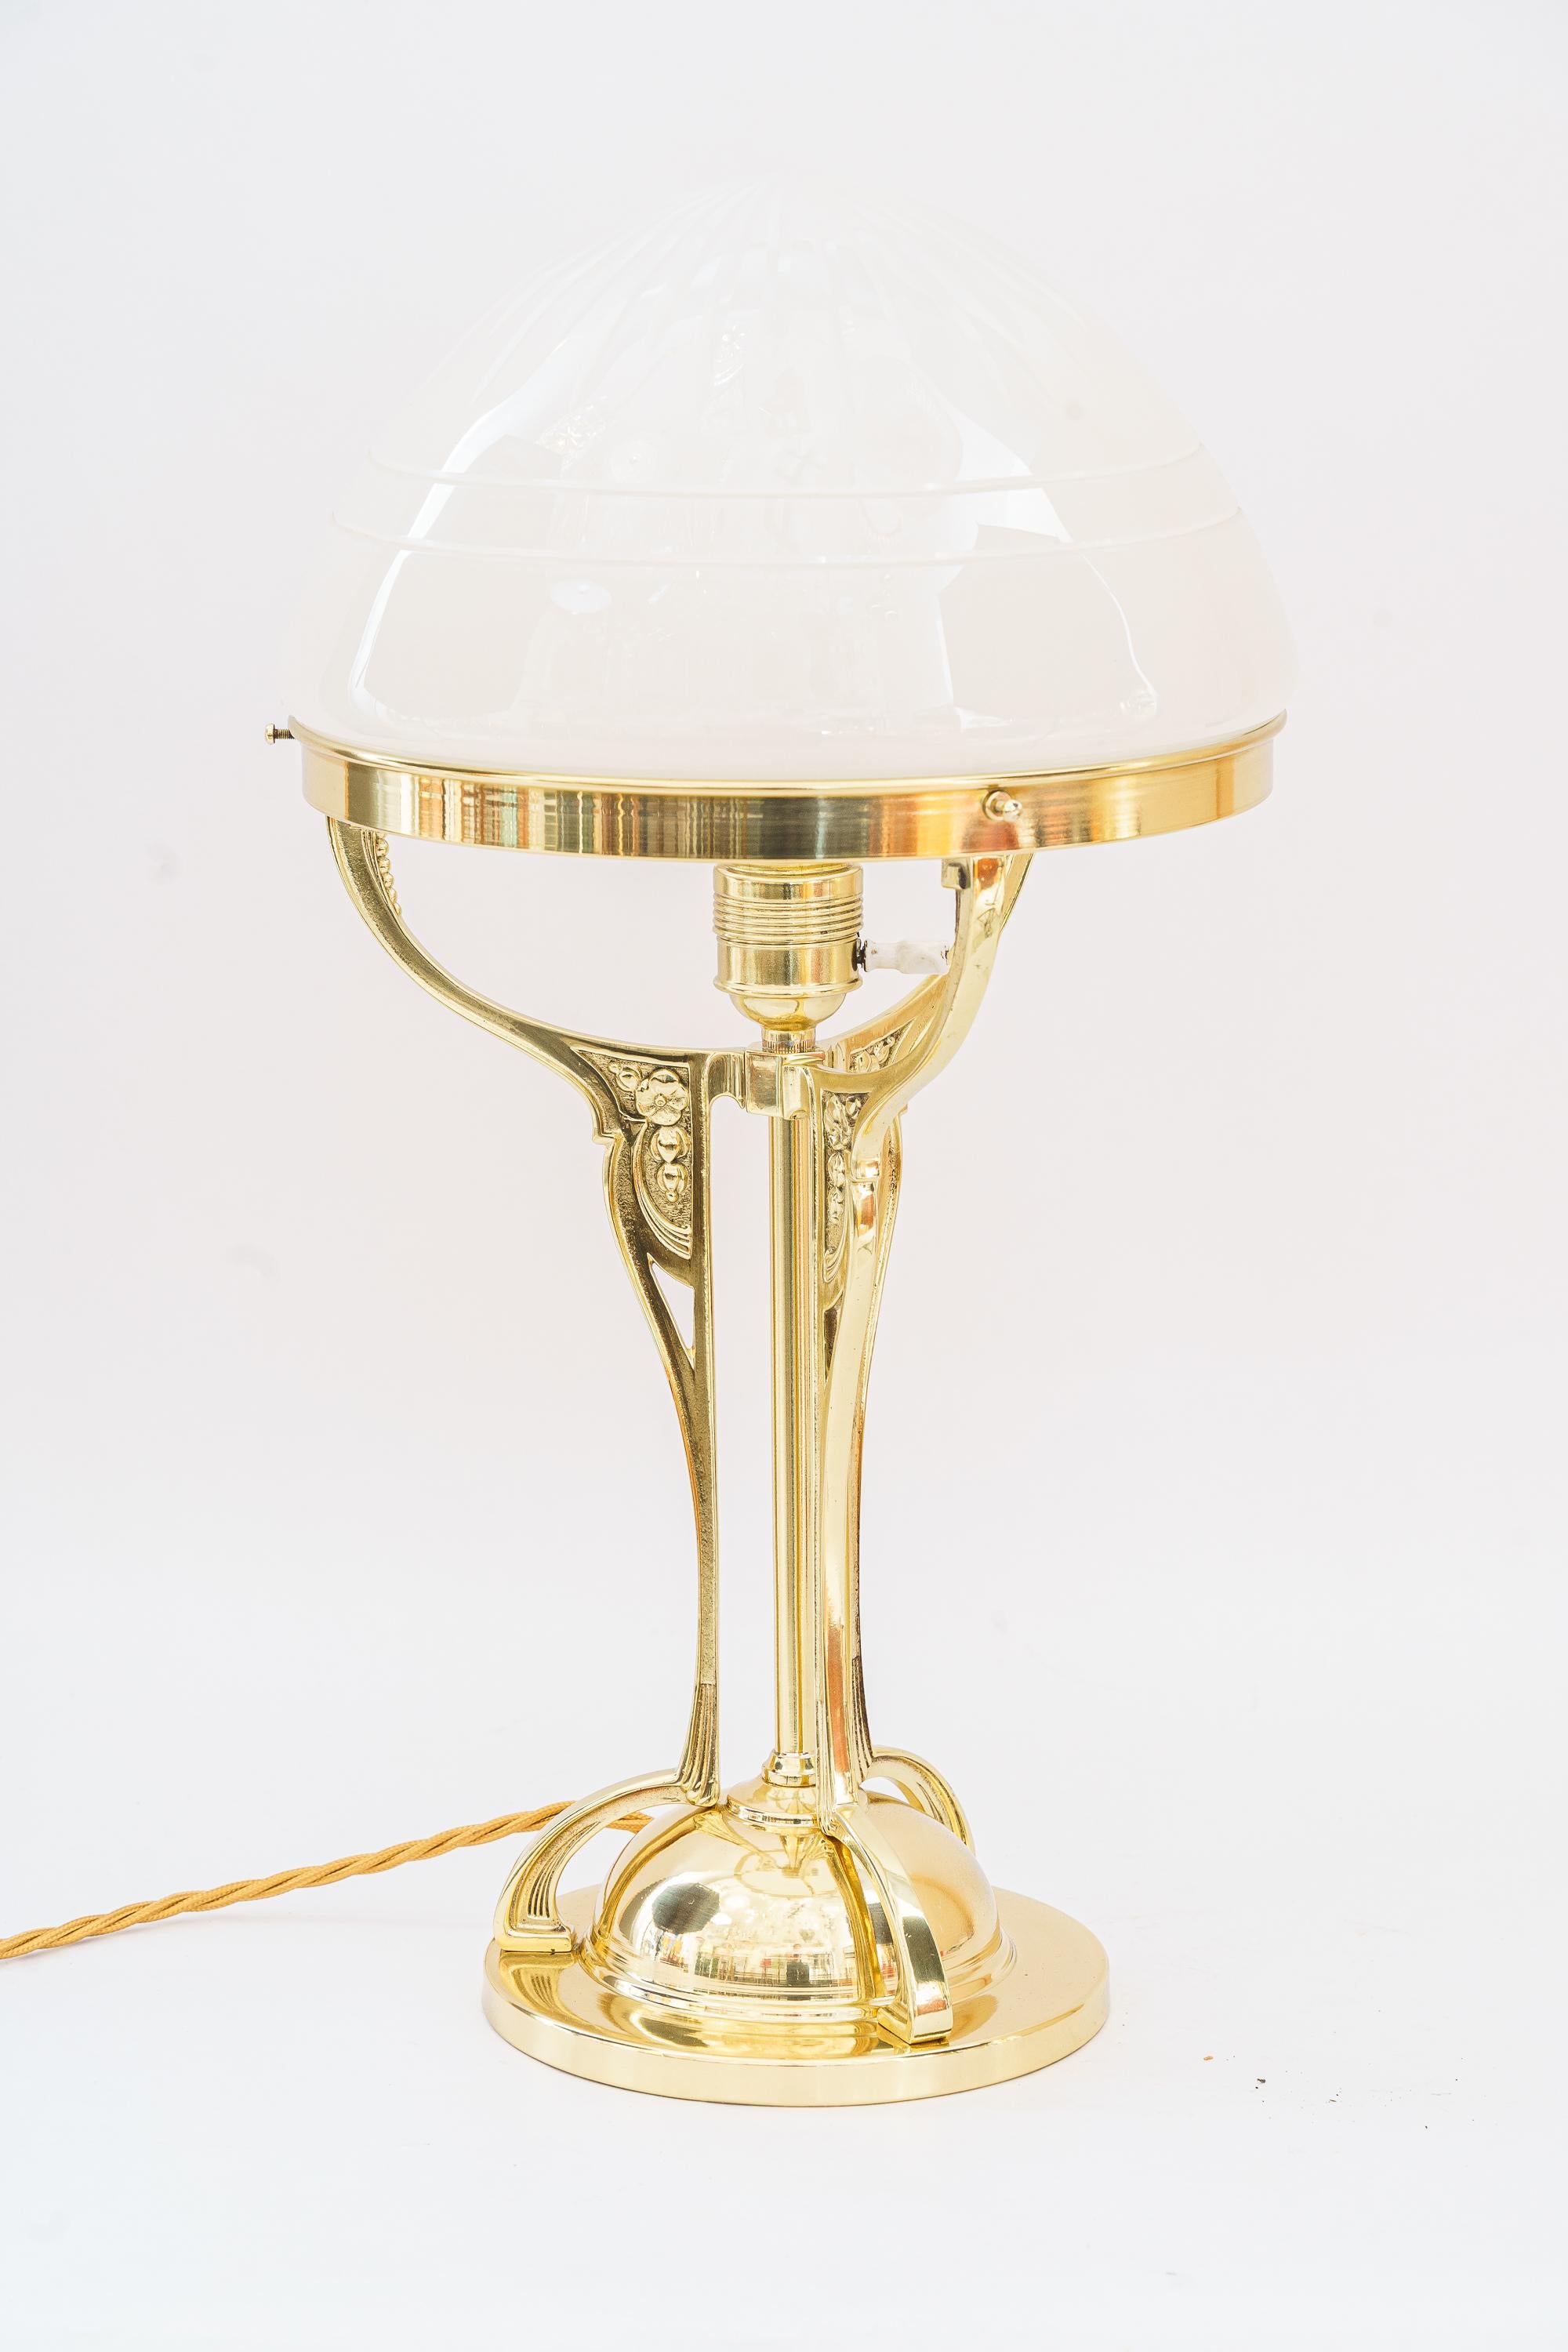 Art Deco brass table lamp vienna around 1920s
Brass polished and stove enameled
Cut glass shade